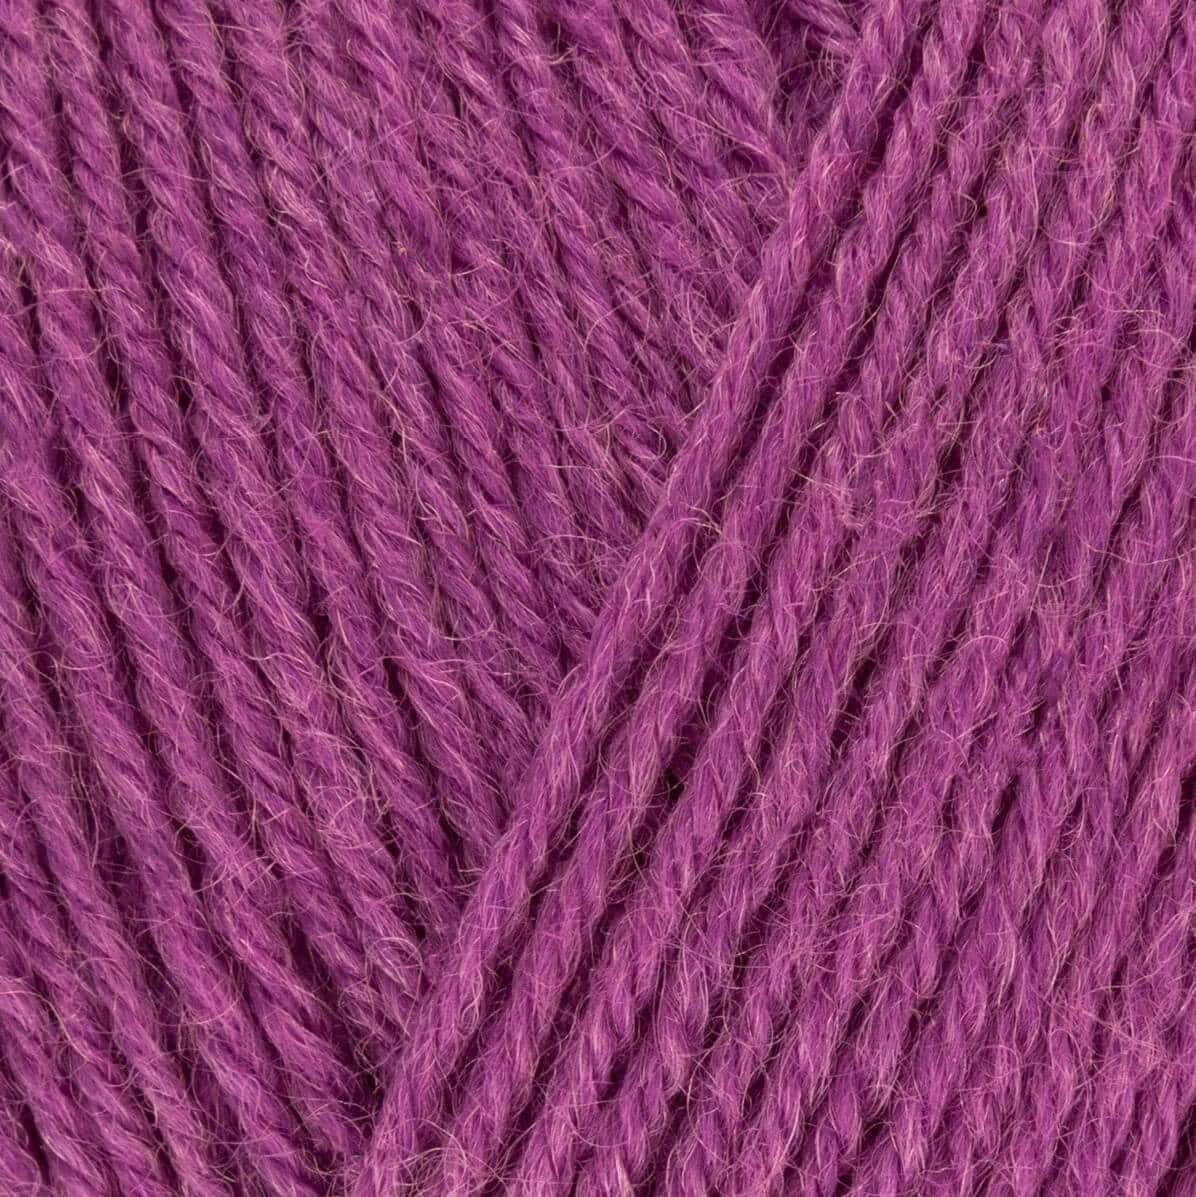 West Yorkshire Spinners Signature 4ply - Blackcurrant Bomb 735